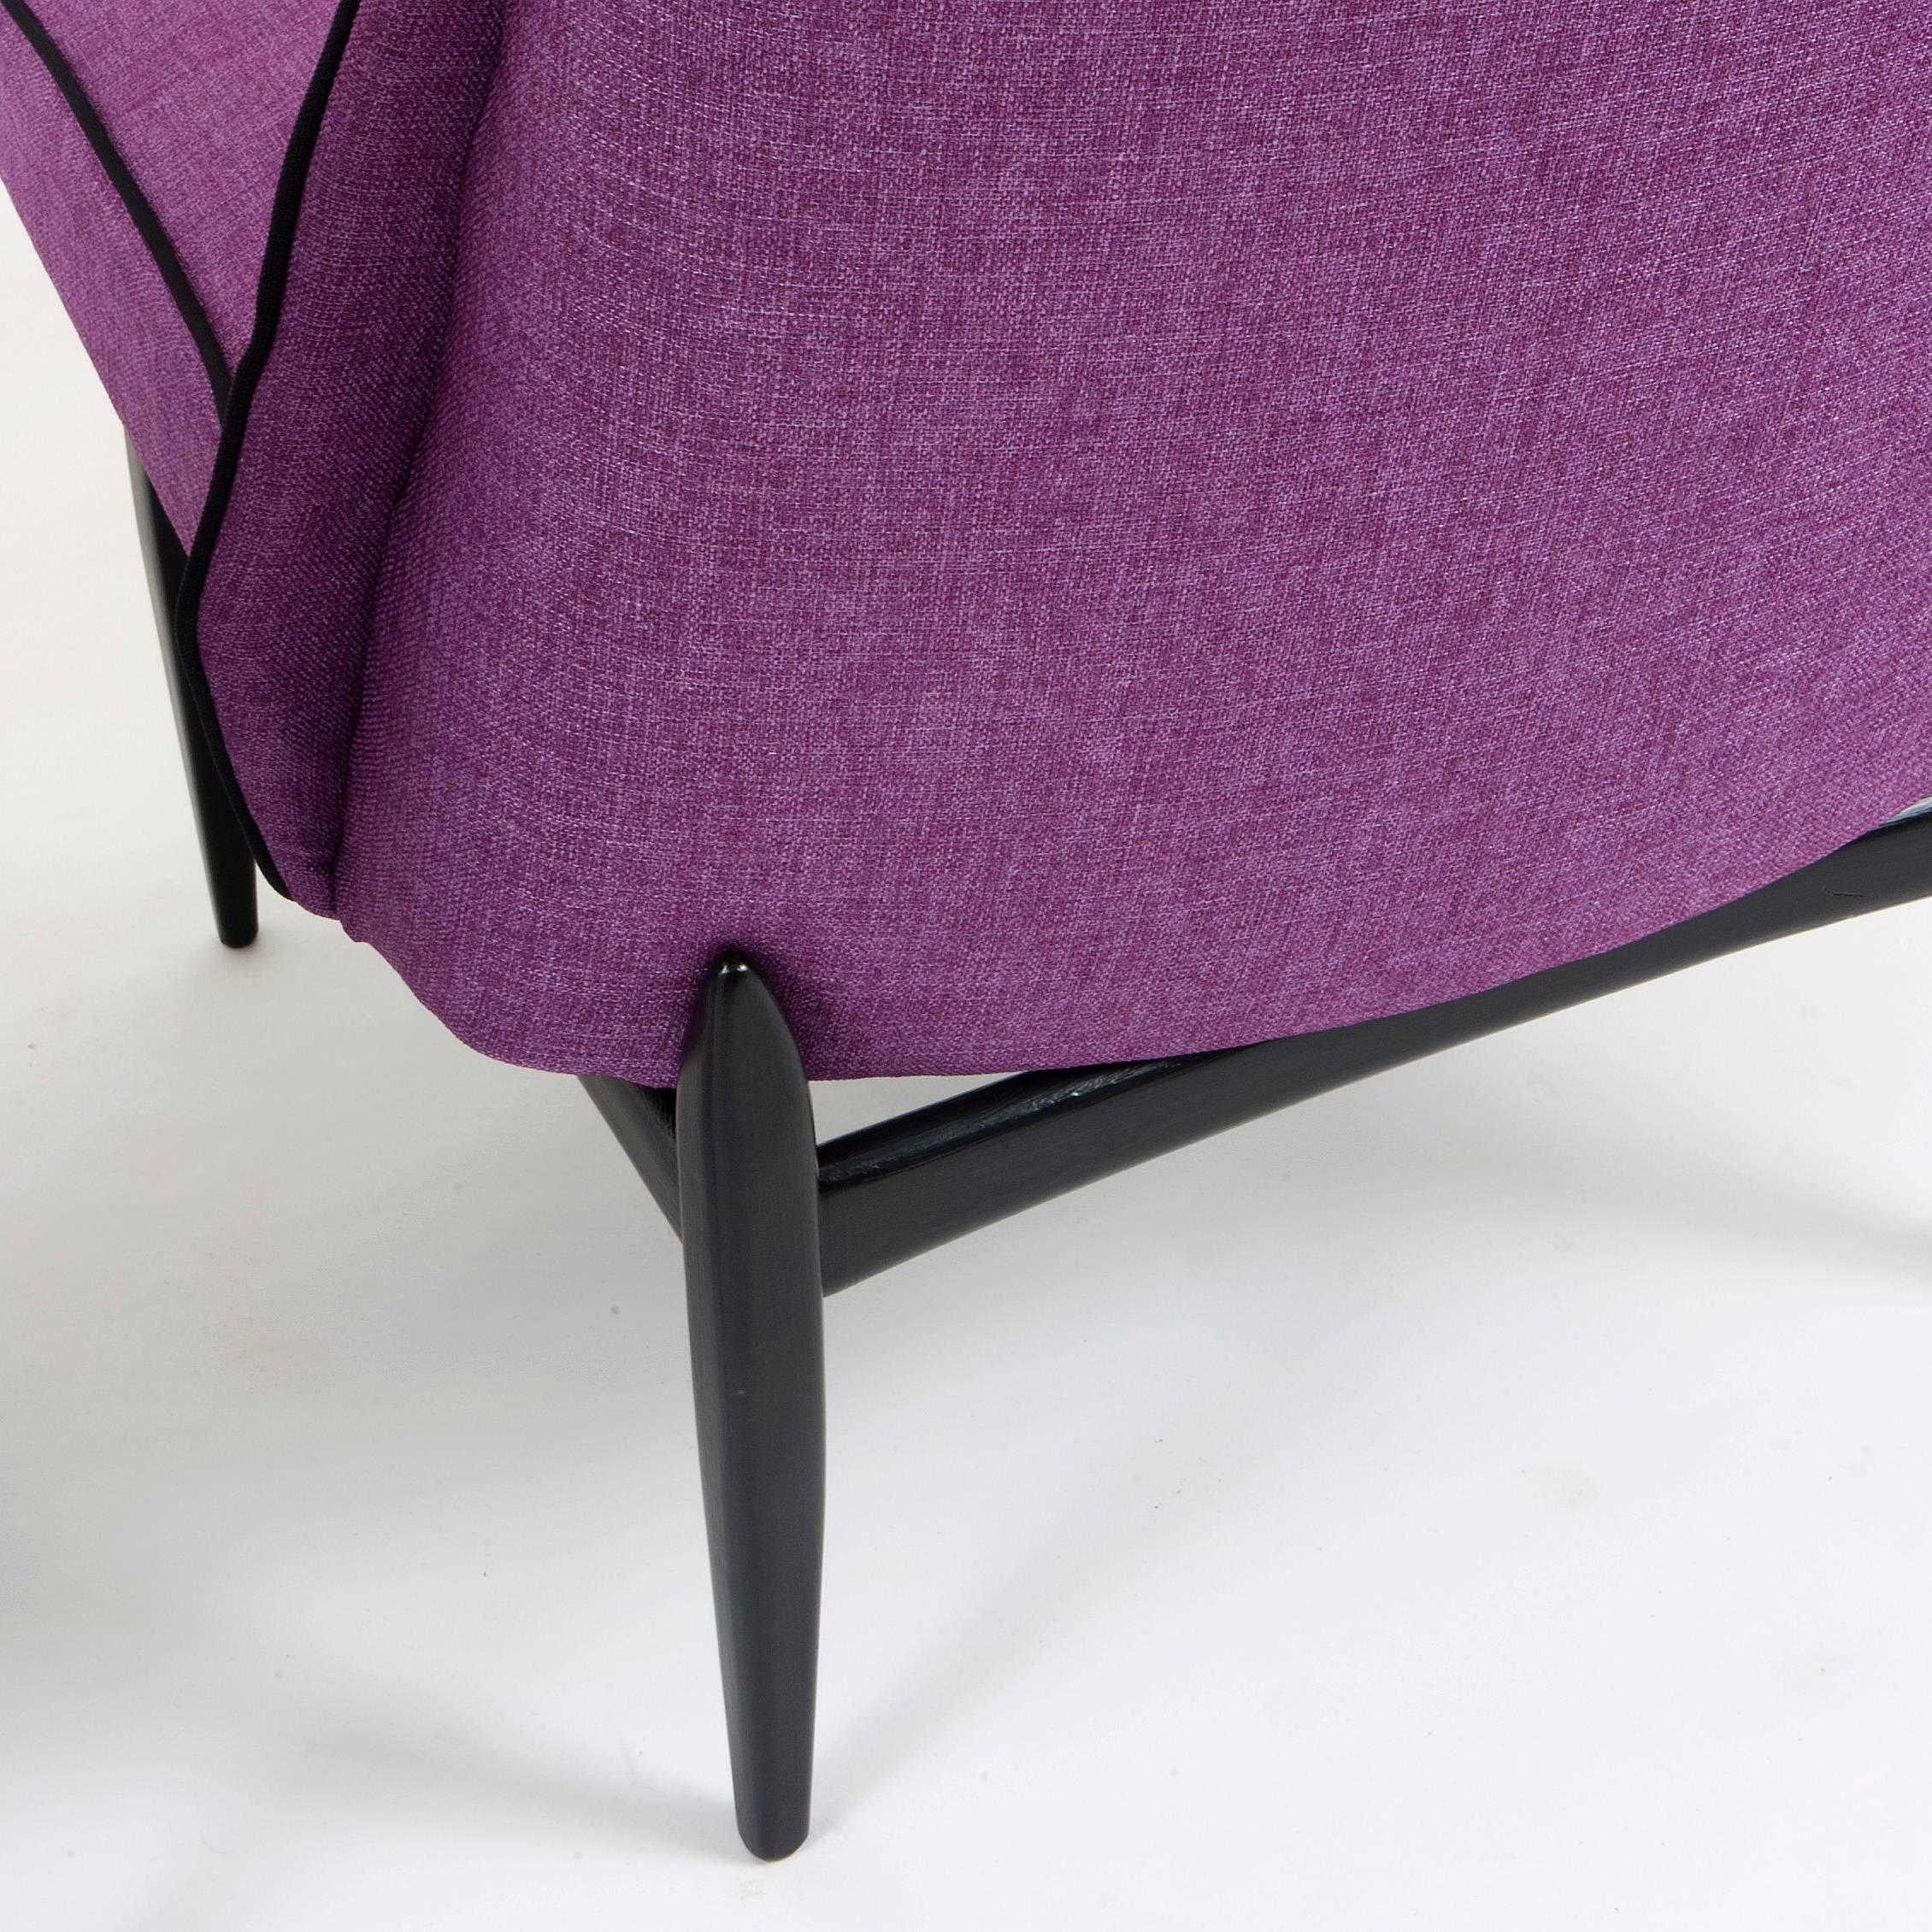 Pair of Italian slipper chairs with violet upholstery and ebonized legs.
  